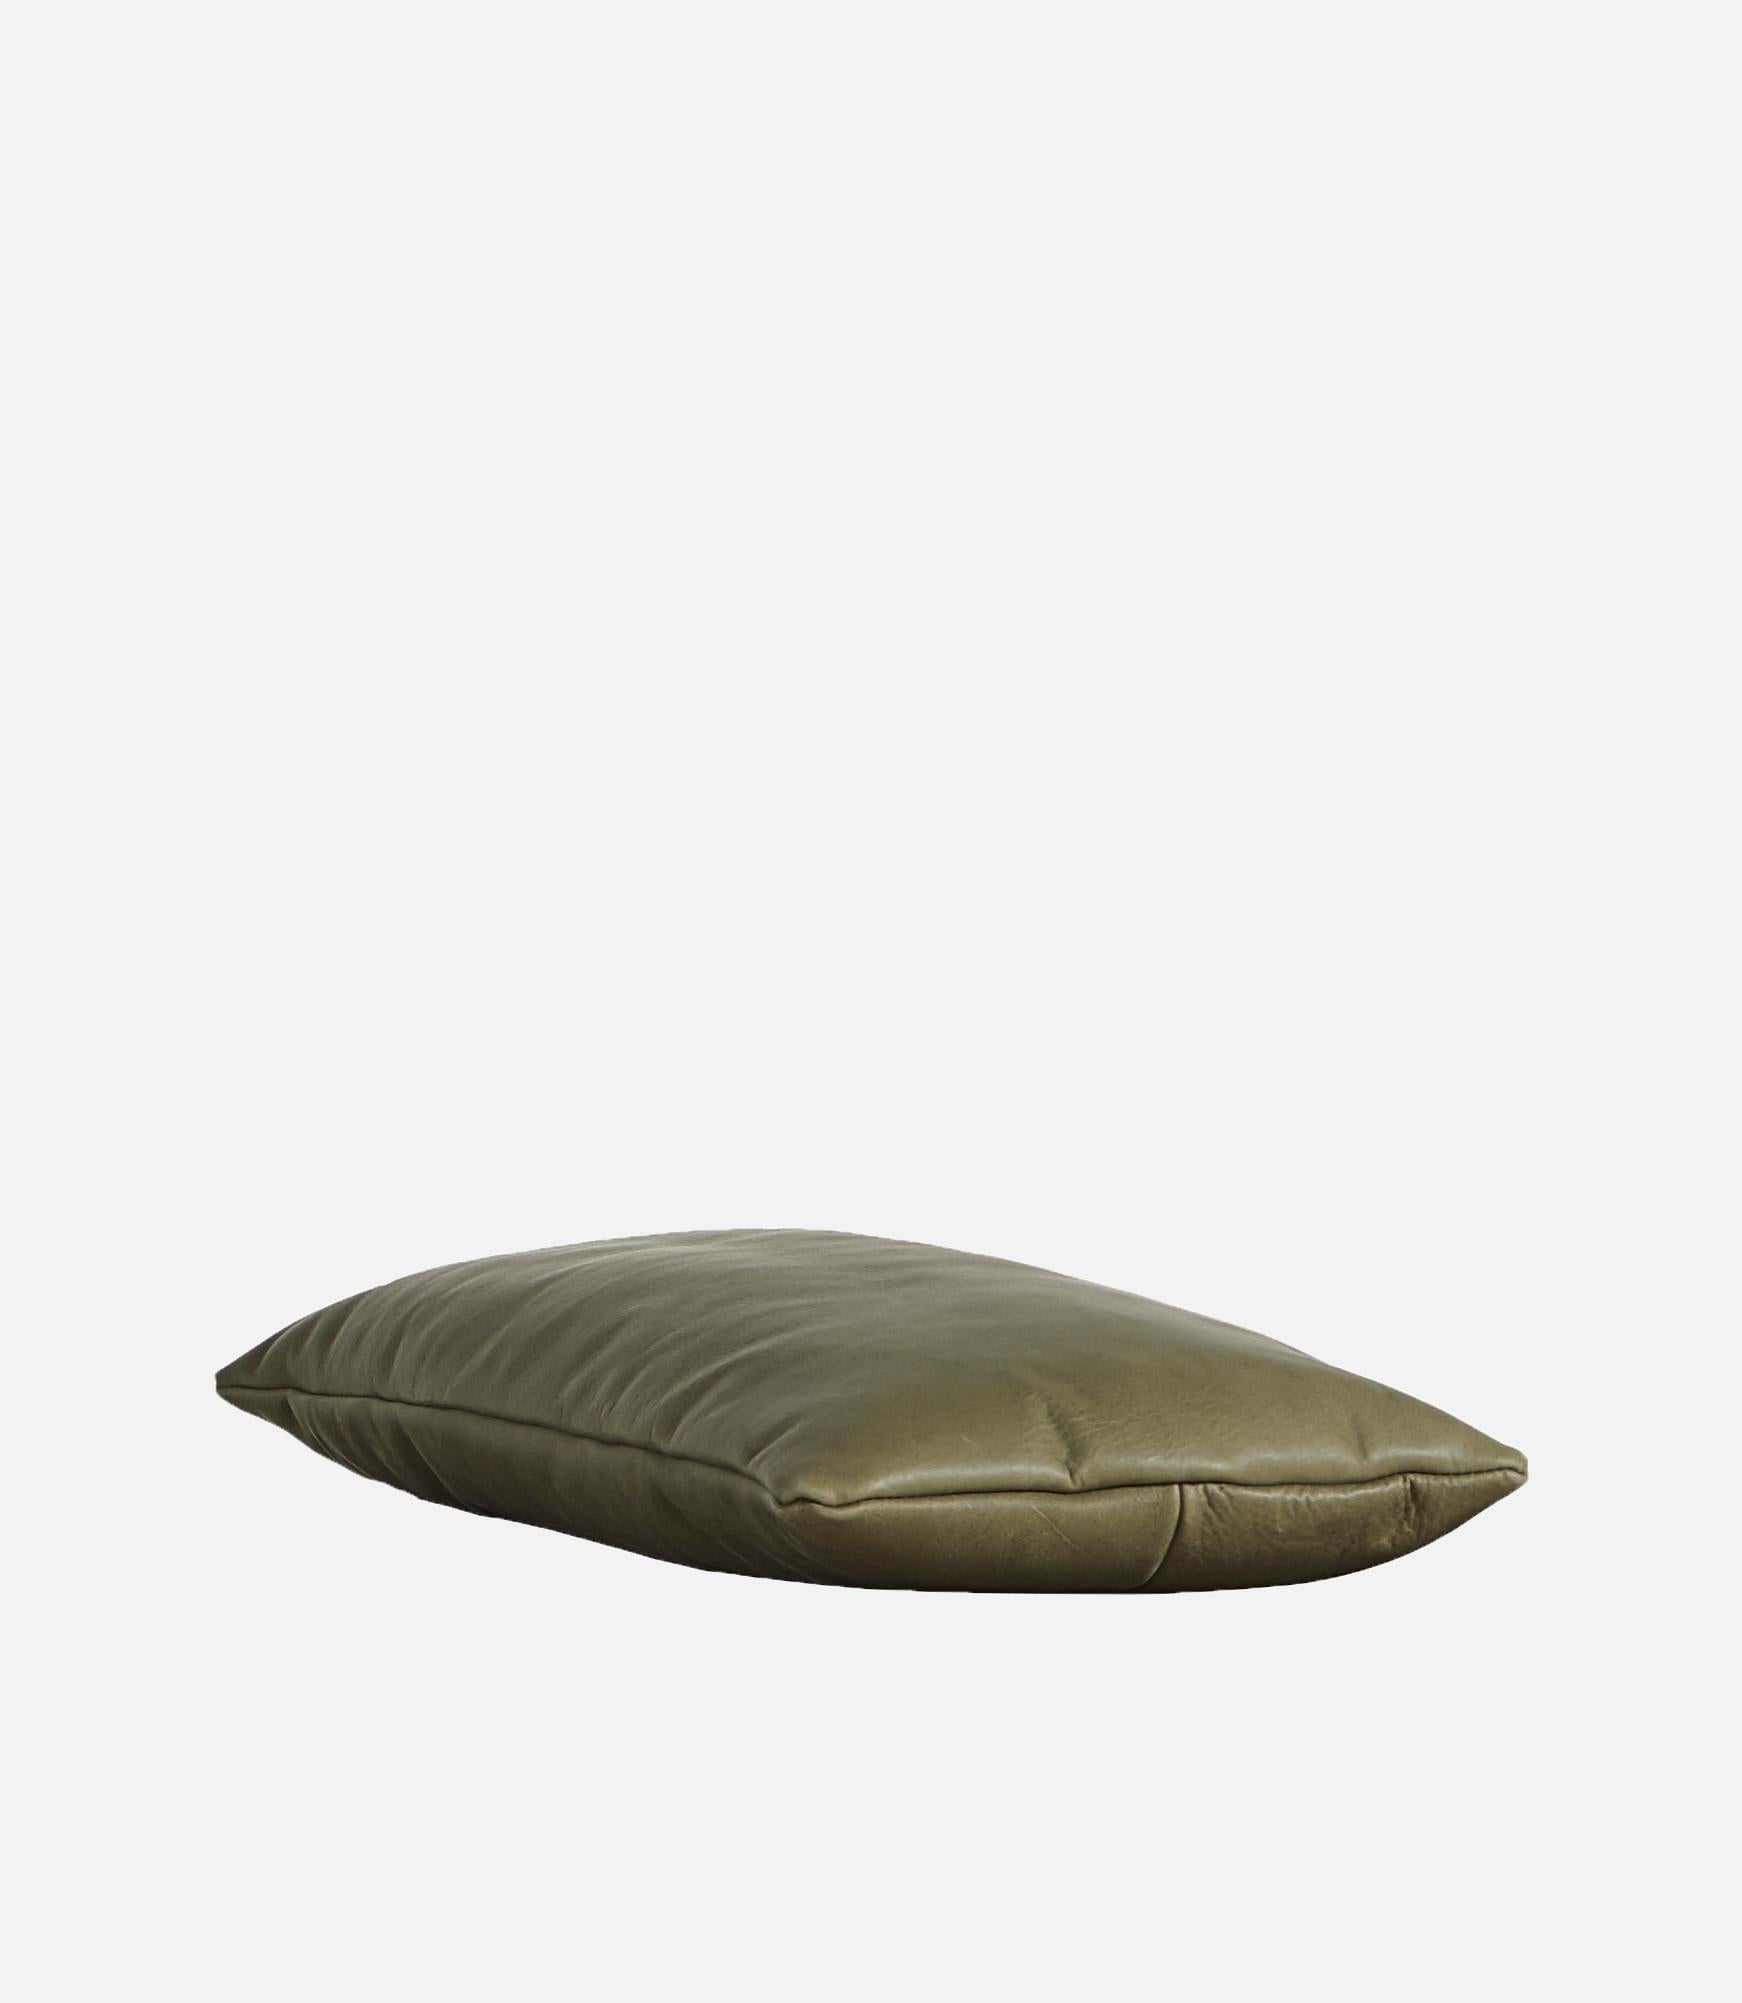 Moss green leather level pillow by Msds Studio.
Materials: camo leather, fabric.
Dimensions: D 23.5 x W 67 x H 8.5 cm.

The founders, Mia and Torben Koed, decided to put their 30 years of experience into a new project. It was time for a change